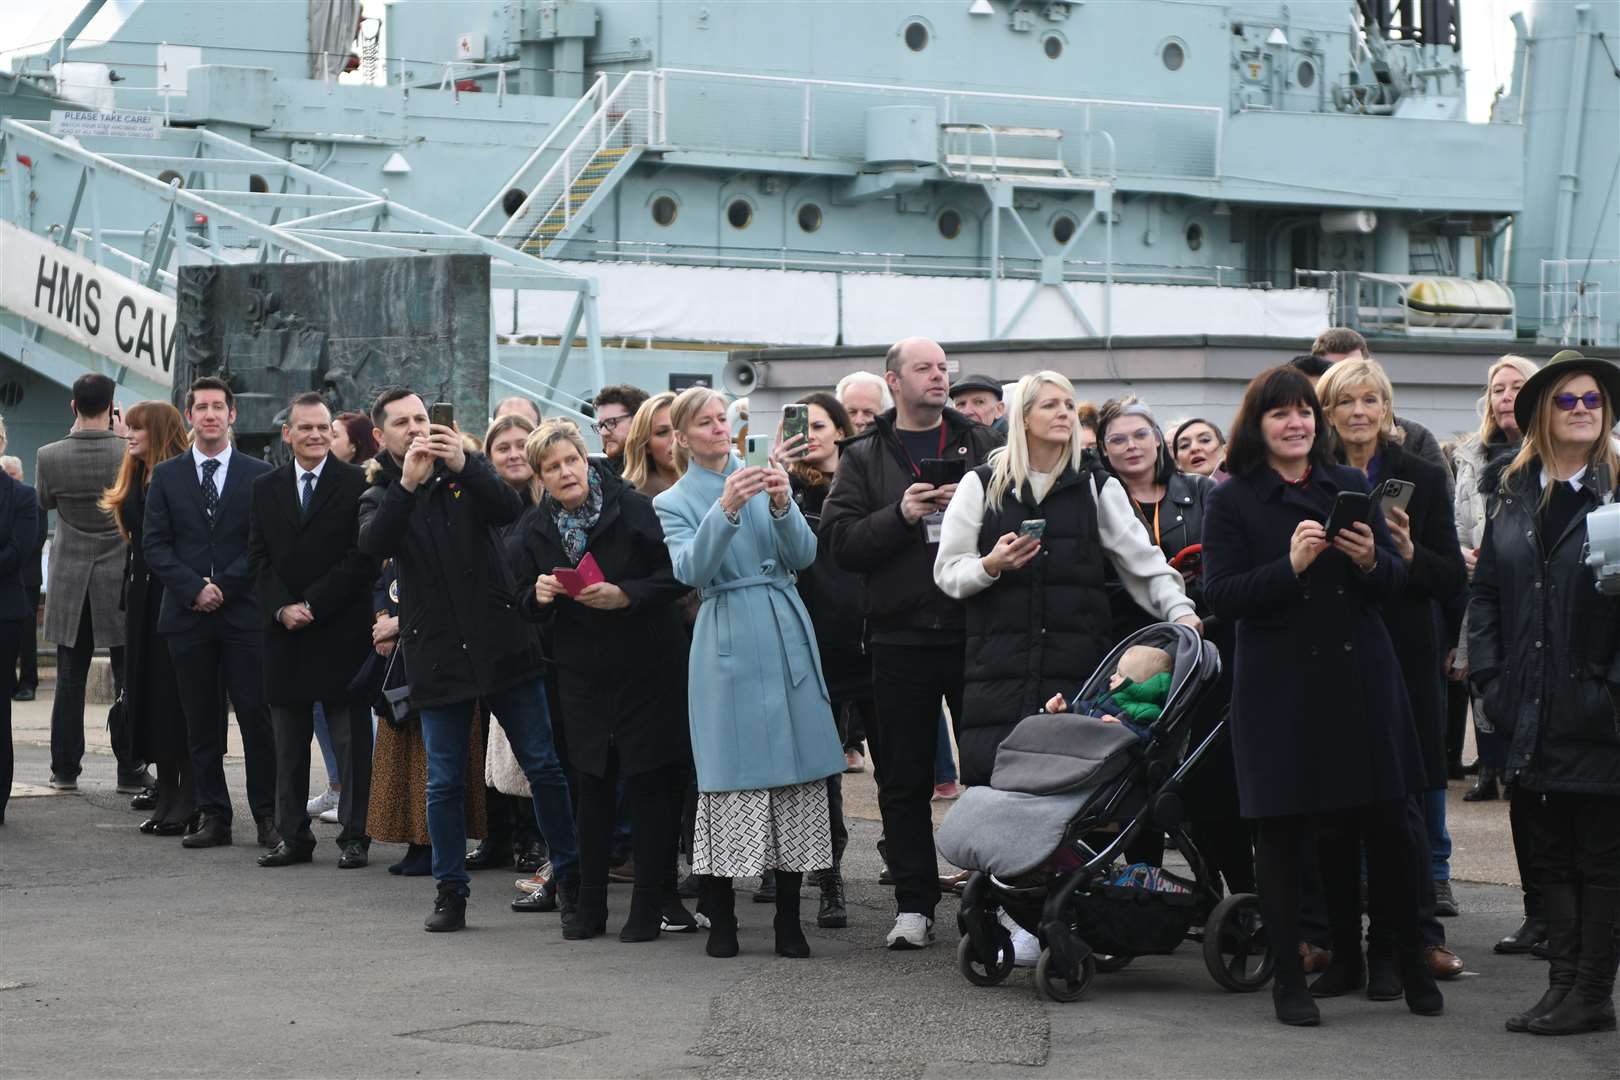 Members of the public hoping to catch a glimpse of The Prince of Wales at Chatham Historic Dockyard. Picture: Barry Goodwin